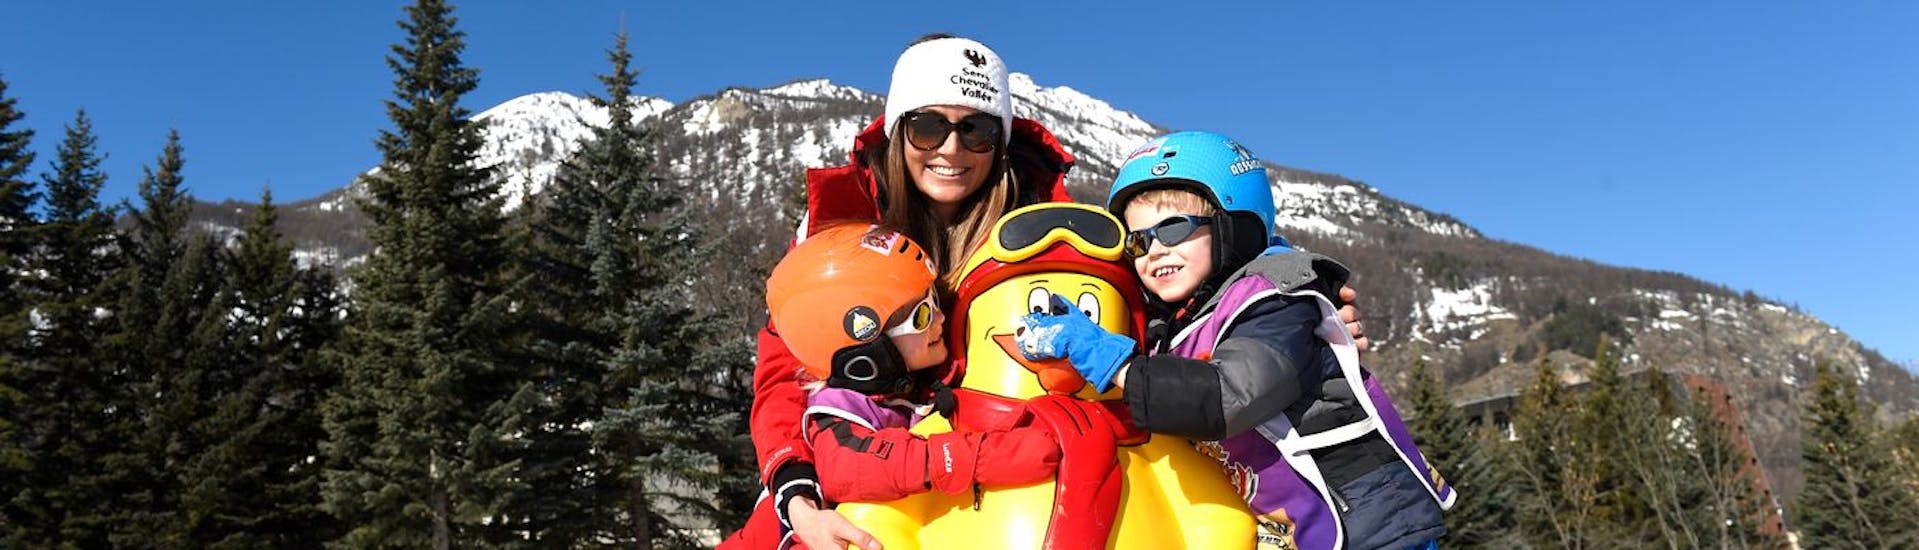 Children and their instructor of the Ski School ESF Serre Chevalier - Villeneuve having fun with Piou Piou during the "Baby Skieur" kids ski lessons.